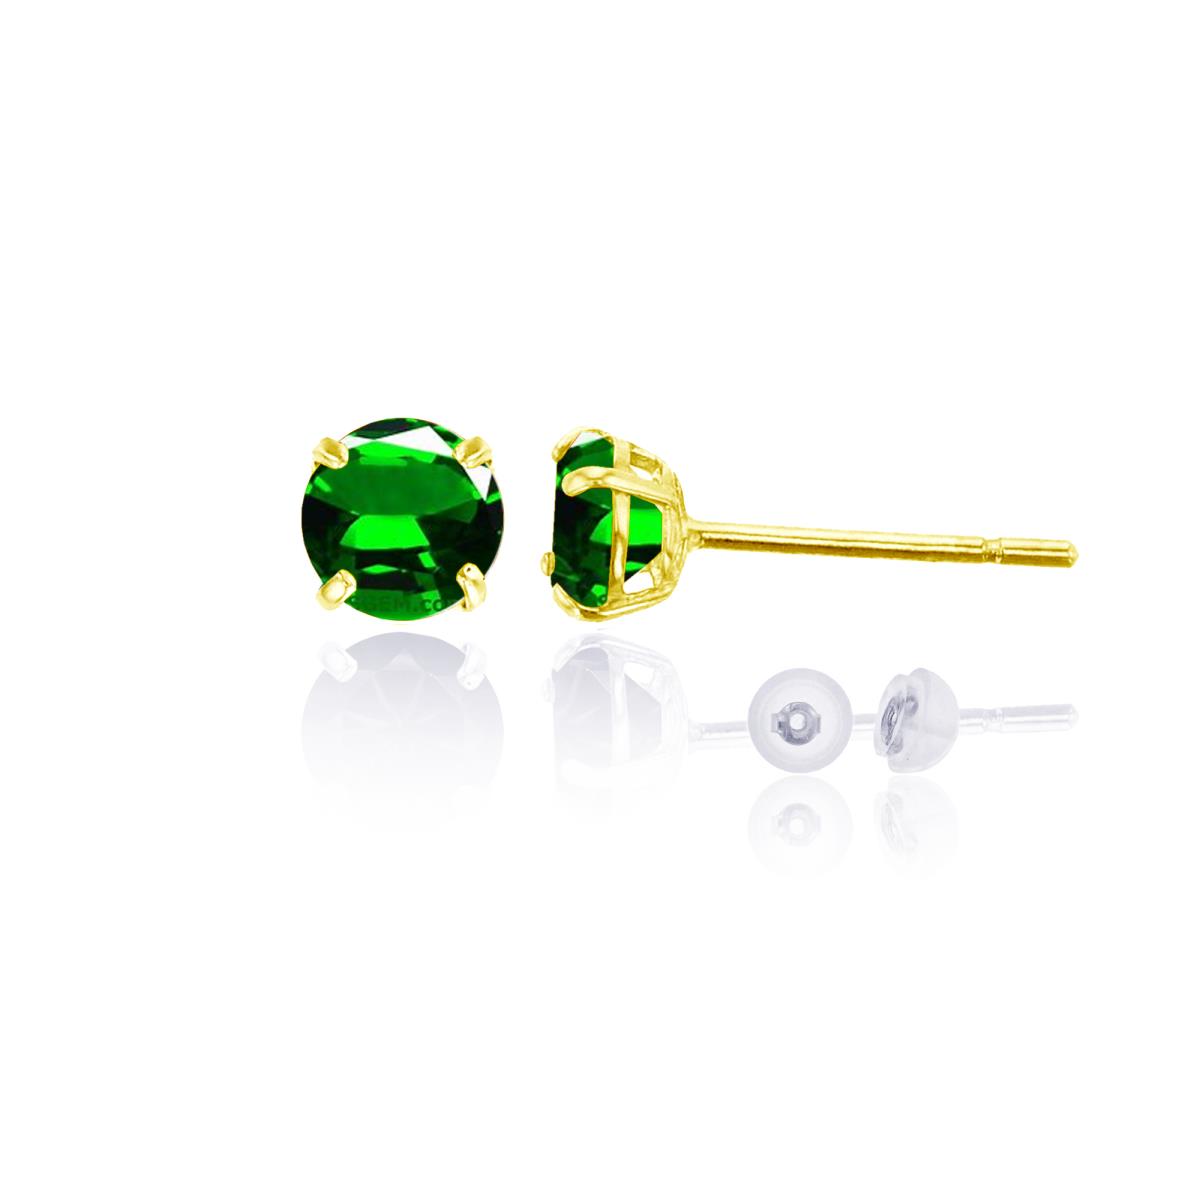 10K Yellow Gold 6.00mm Round Chrome Diopside Stud Earring